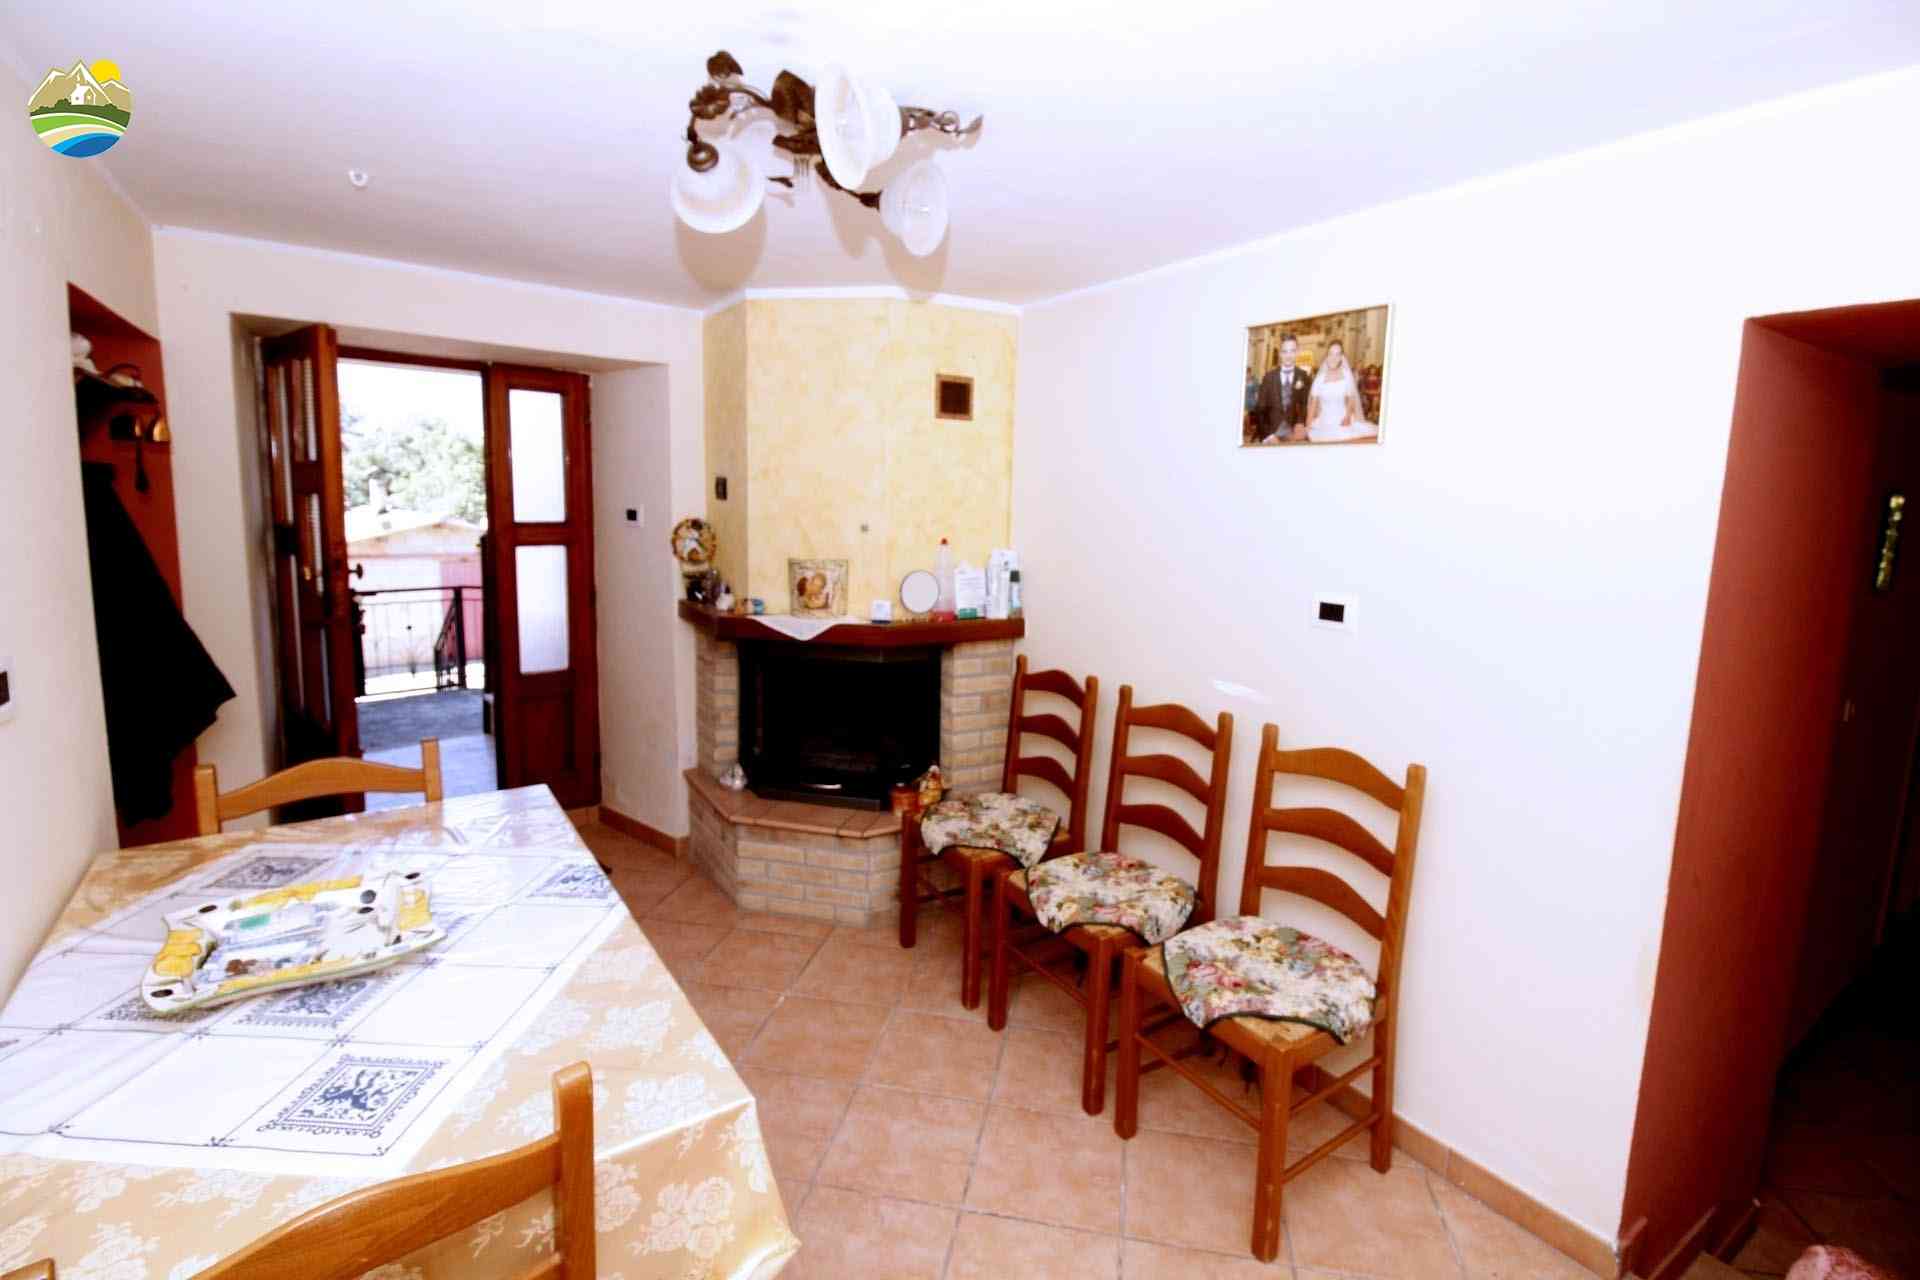 Country Houses Country Houses for sale Bisenti (TE), Casa Maria - Bisenti - EUR 127.354 660